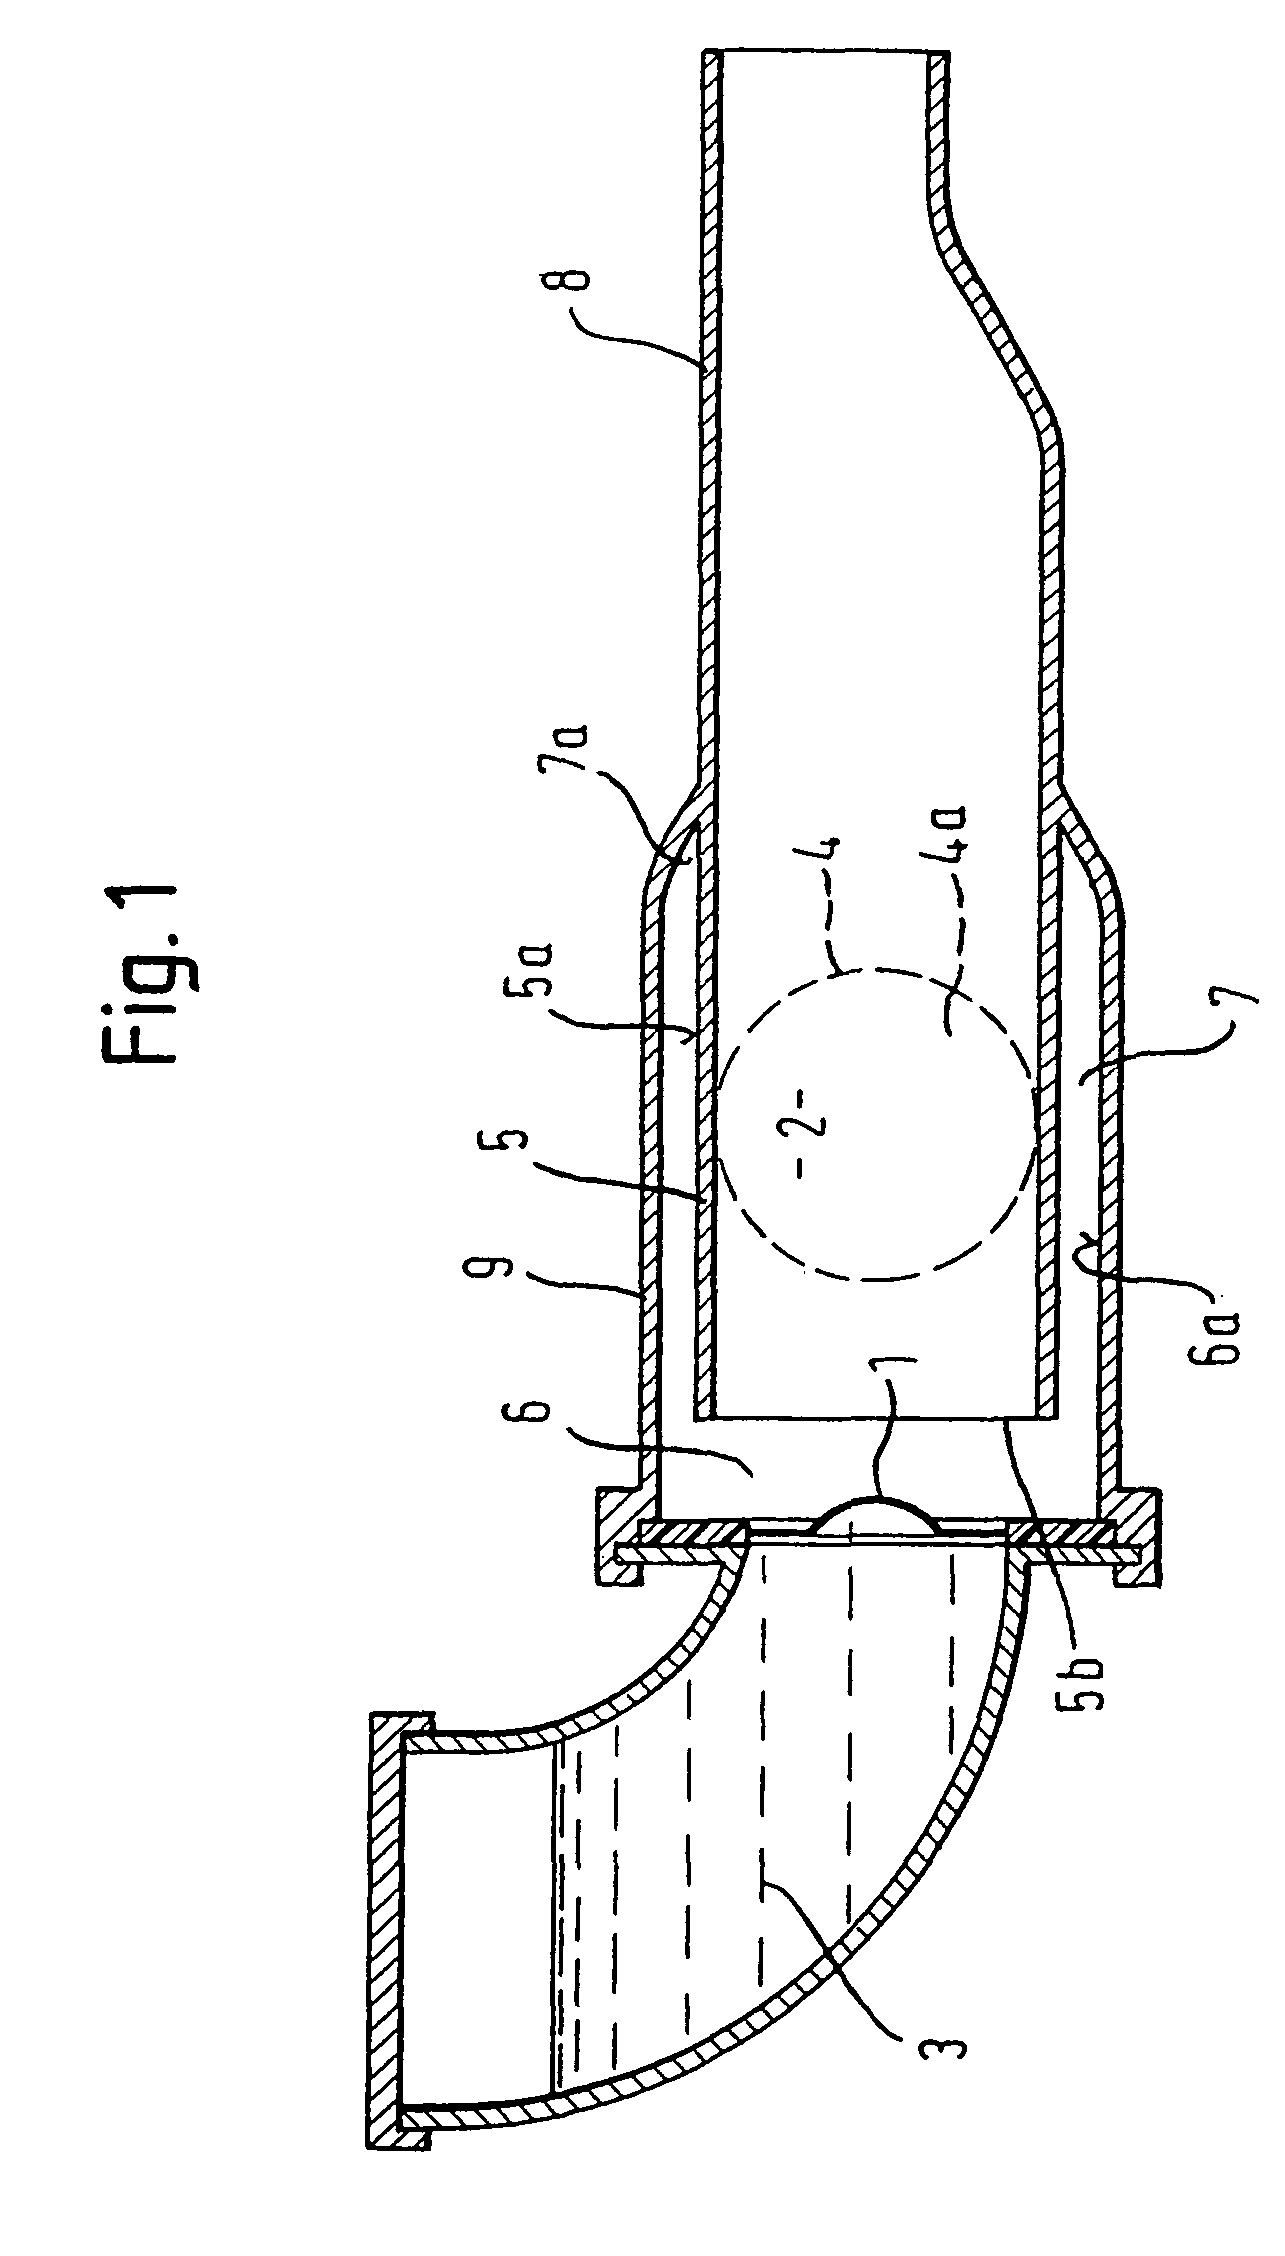 Inhalation therapy device